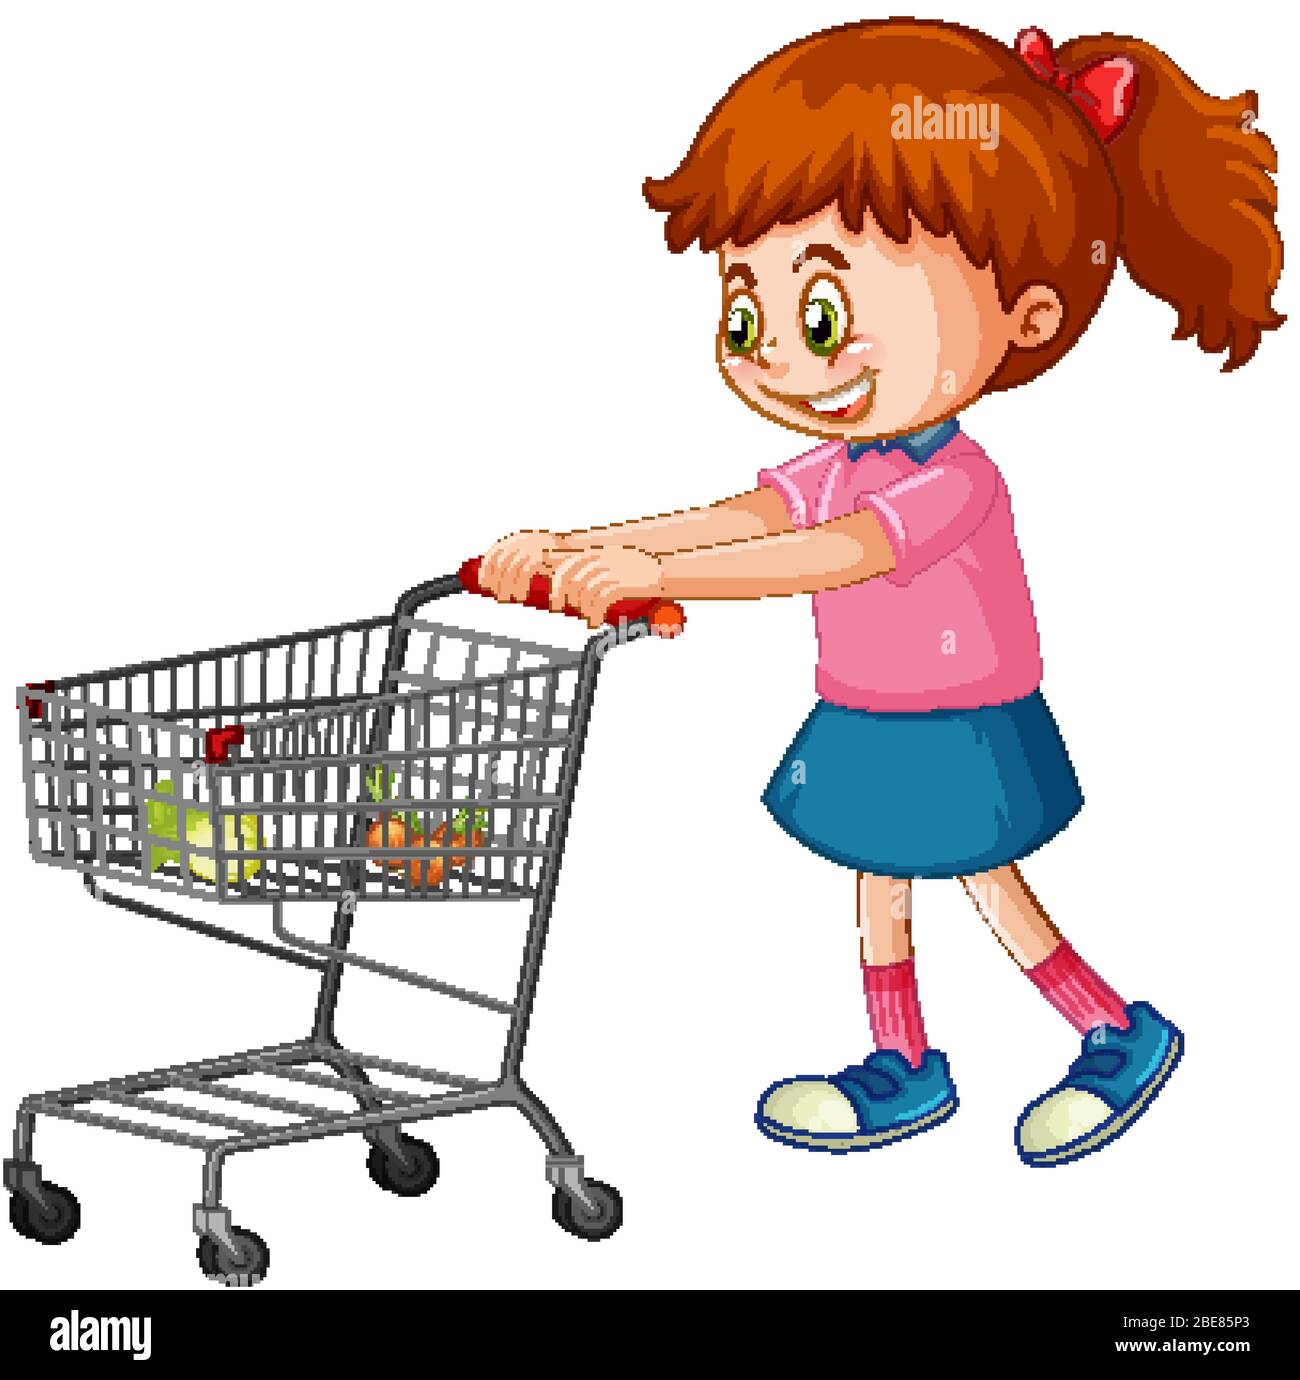 Girl pushing shopping cart with groceries illustration Stock Vector ...